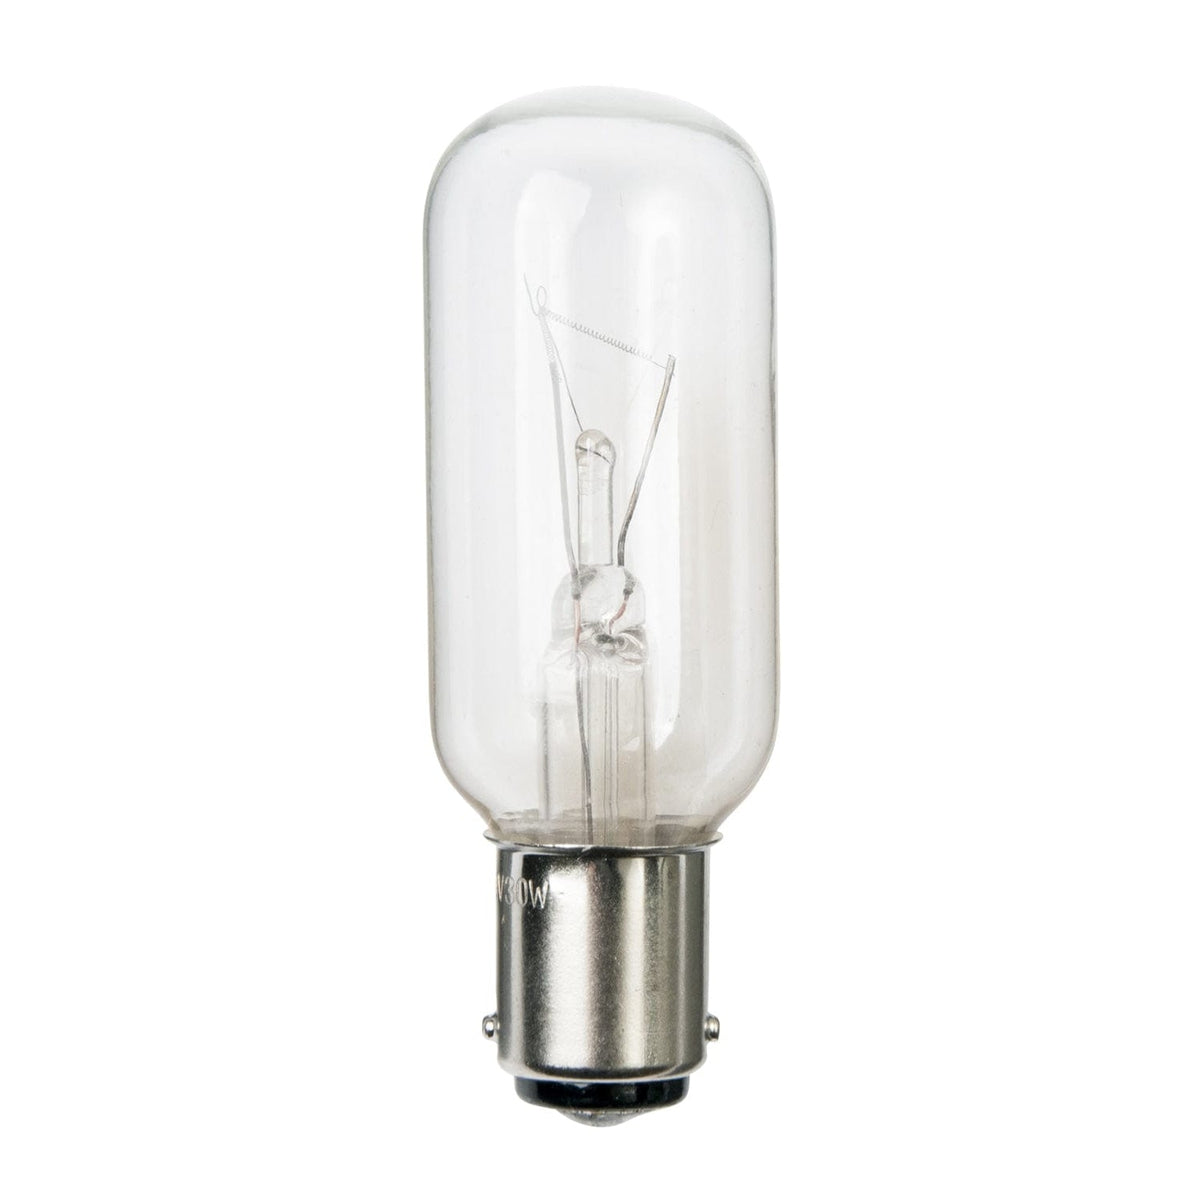 Ancor Qualifies for Free Shipping Ancor Bulb Double Bayonette 120v 30w Each #521164